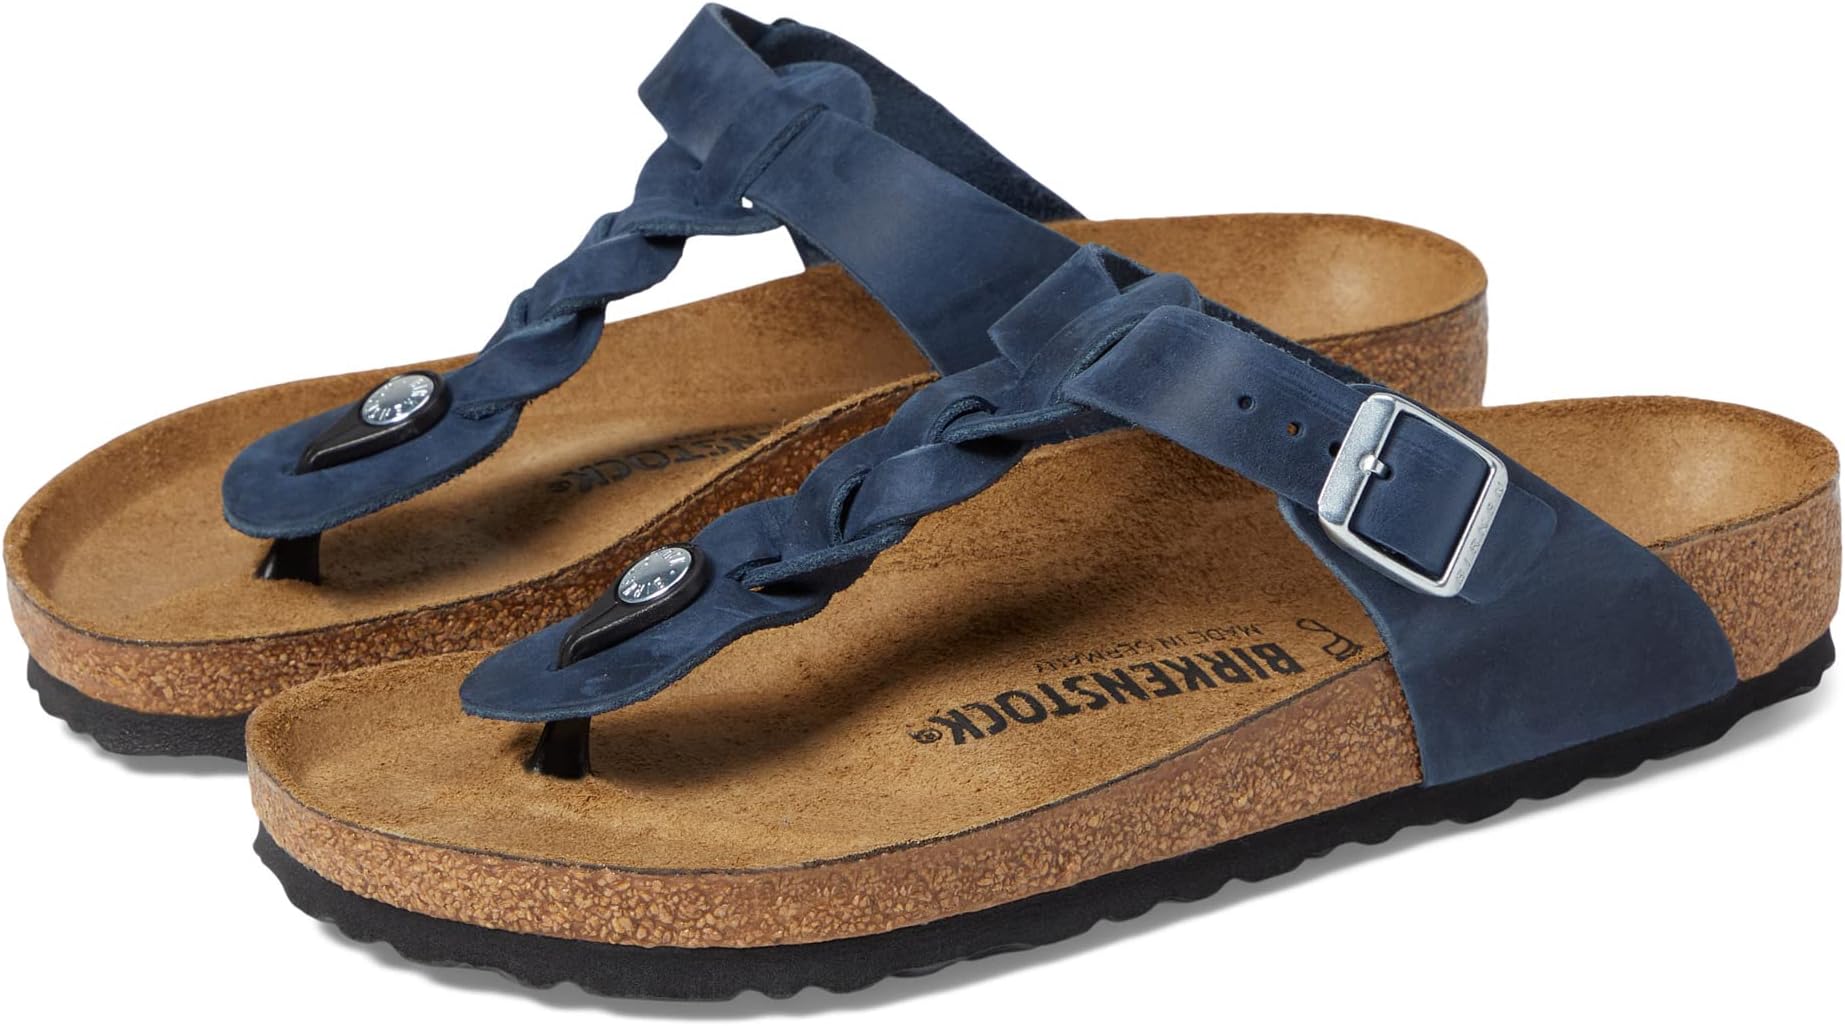 Шлепанцы Gizeh Braided - Oiled Leather Birkenstock, цвет Navy Oiled Leather